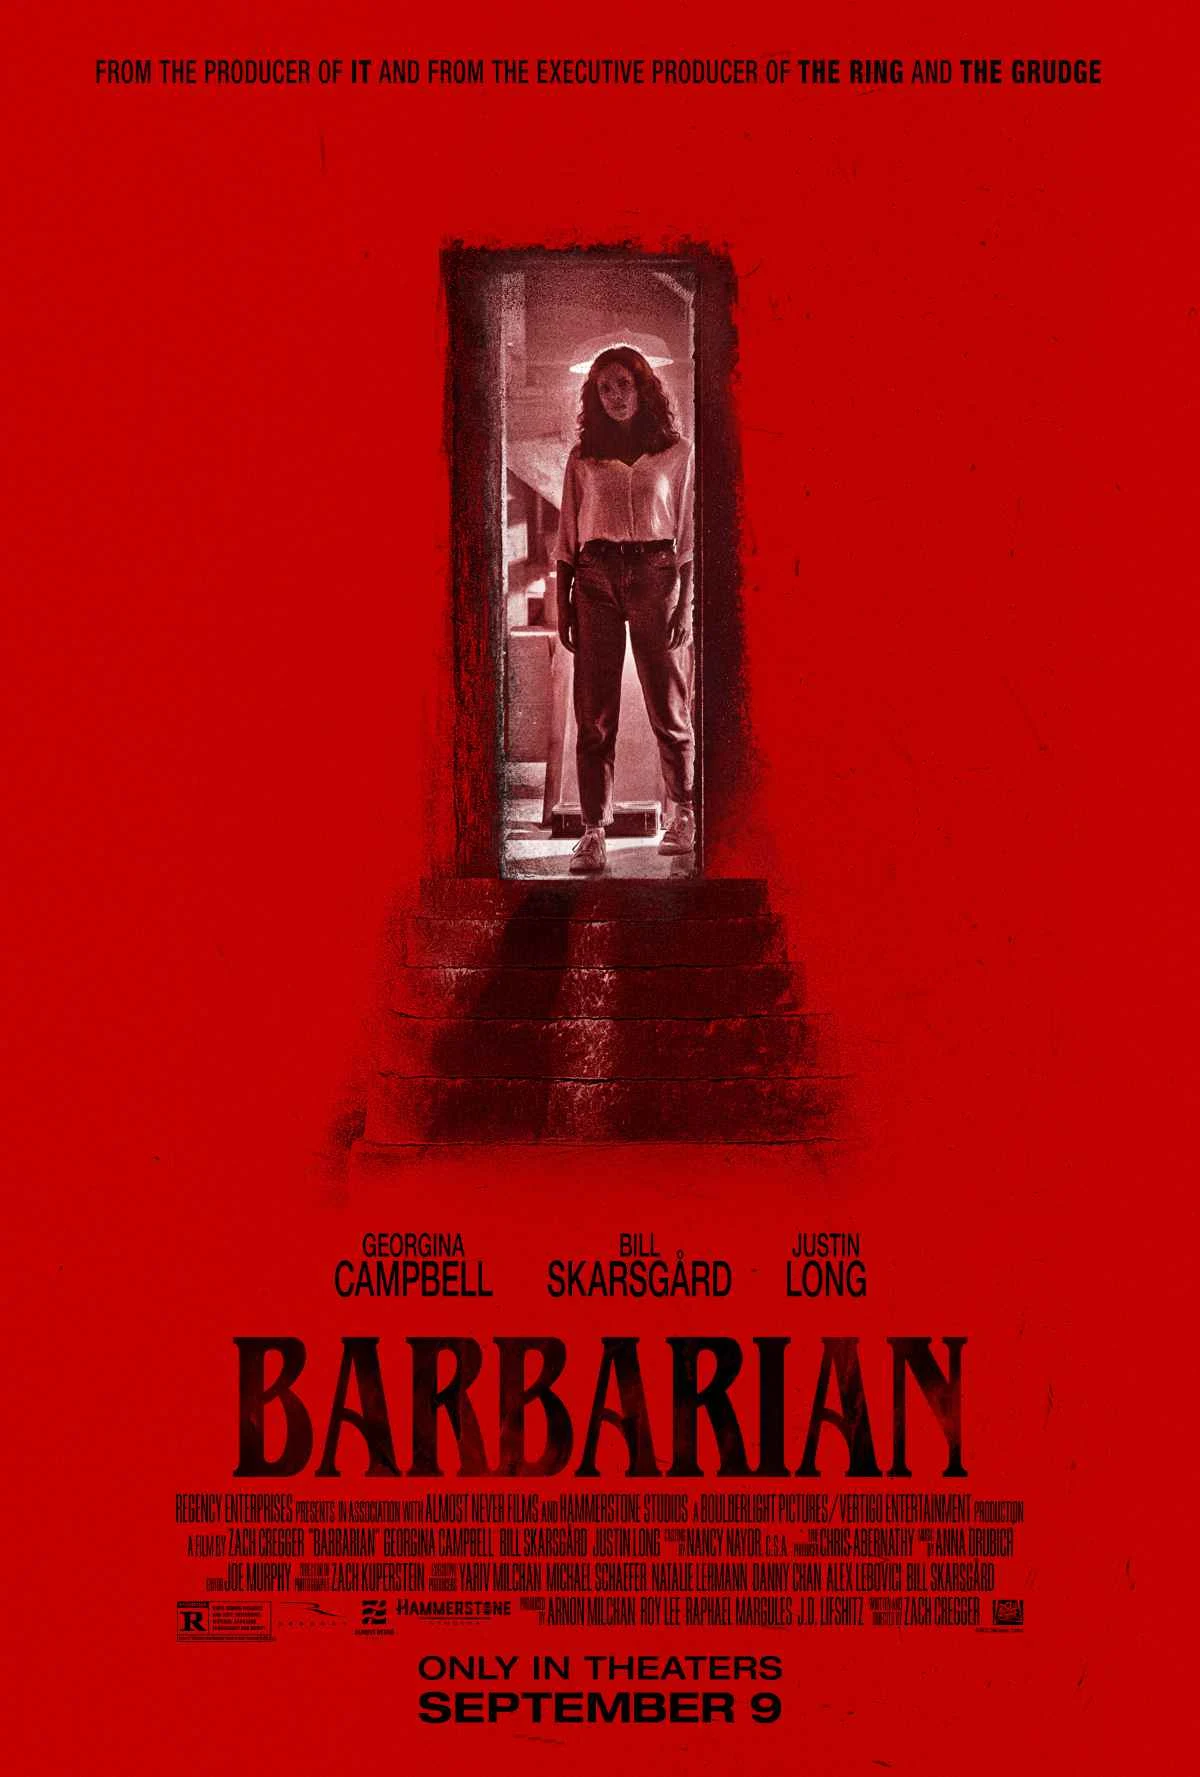 Barbarian Cast and Crew